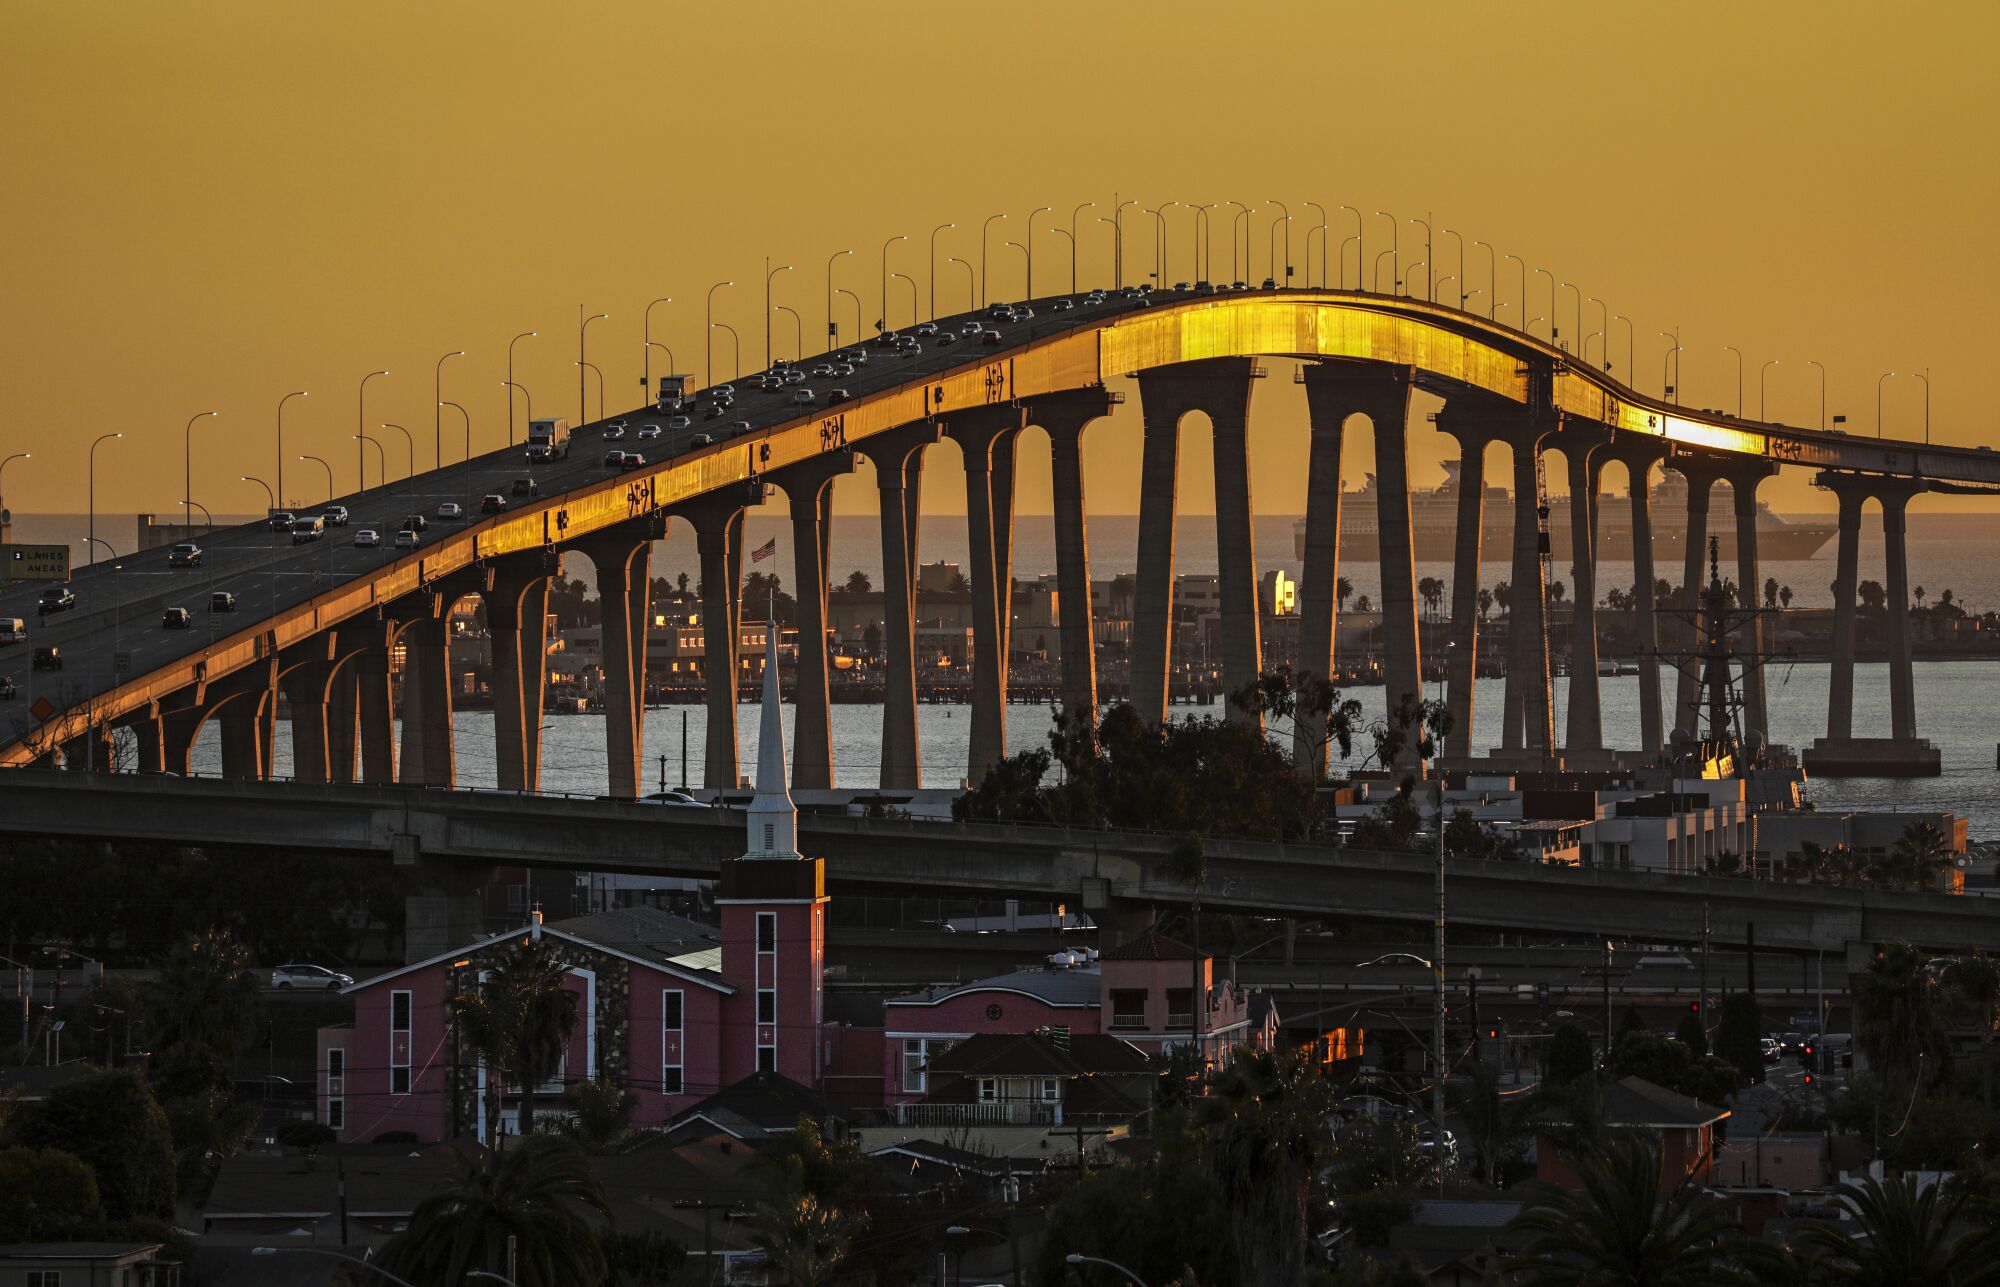 The Coronado Bridge, a gently curving concrete span, has become one of the city's dominant icons. 